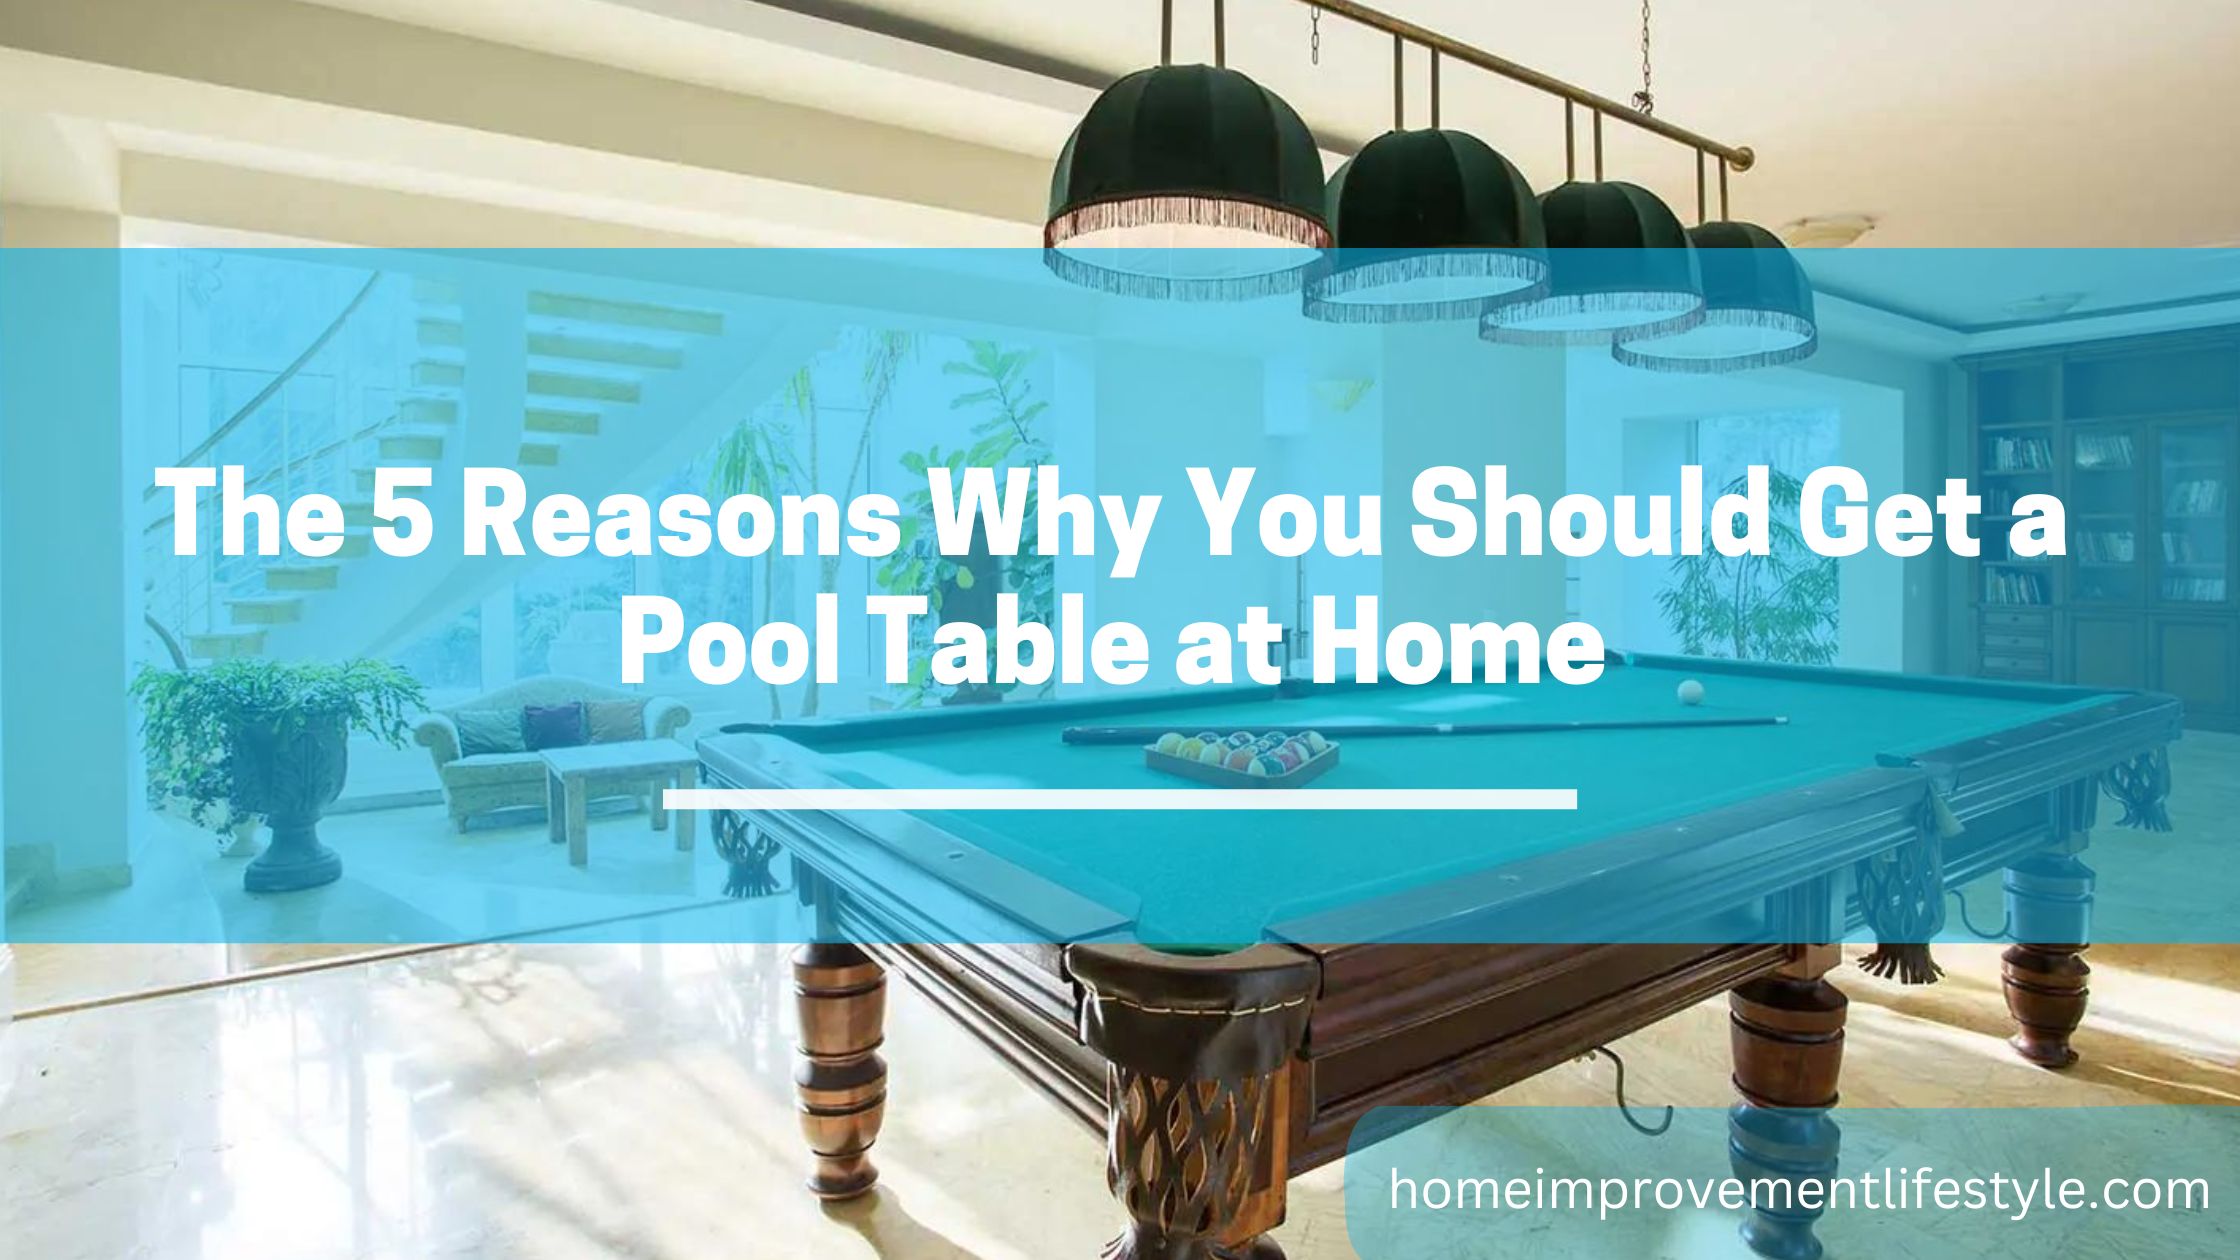 The 5 Reasons Why You Should Get a Pool Table at Home